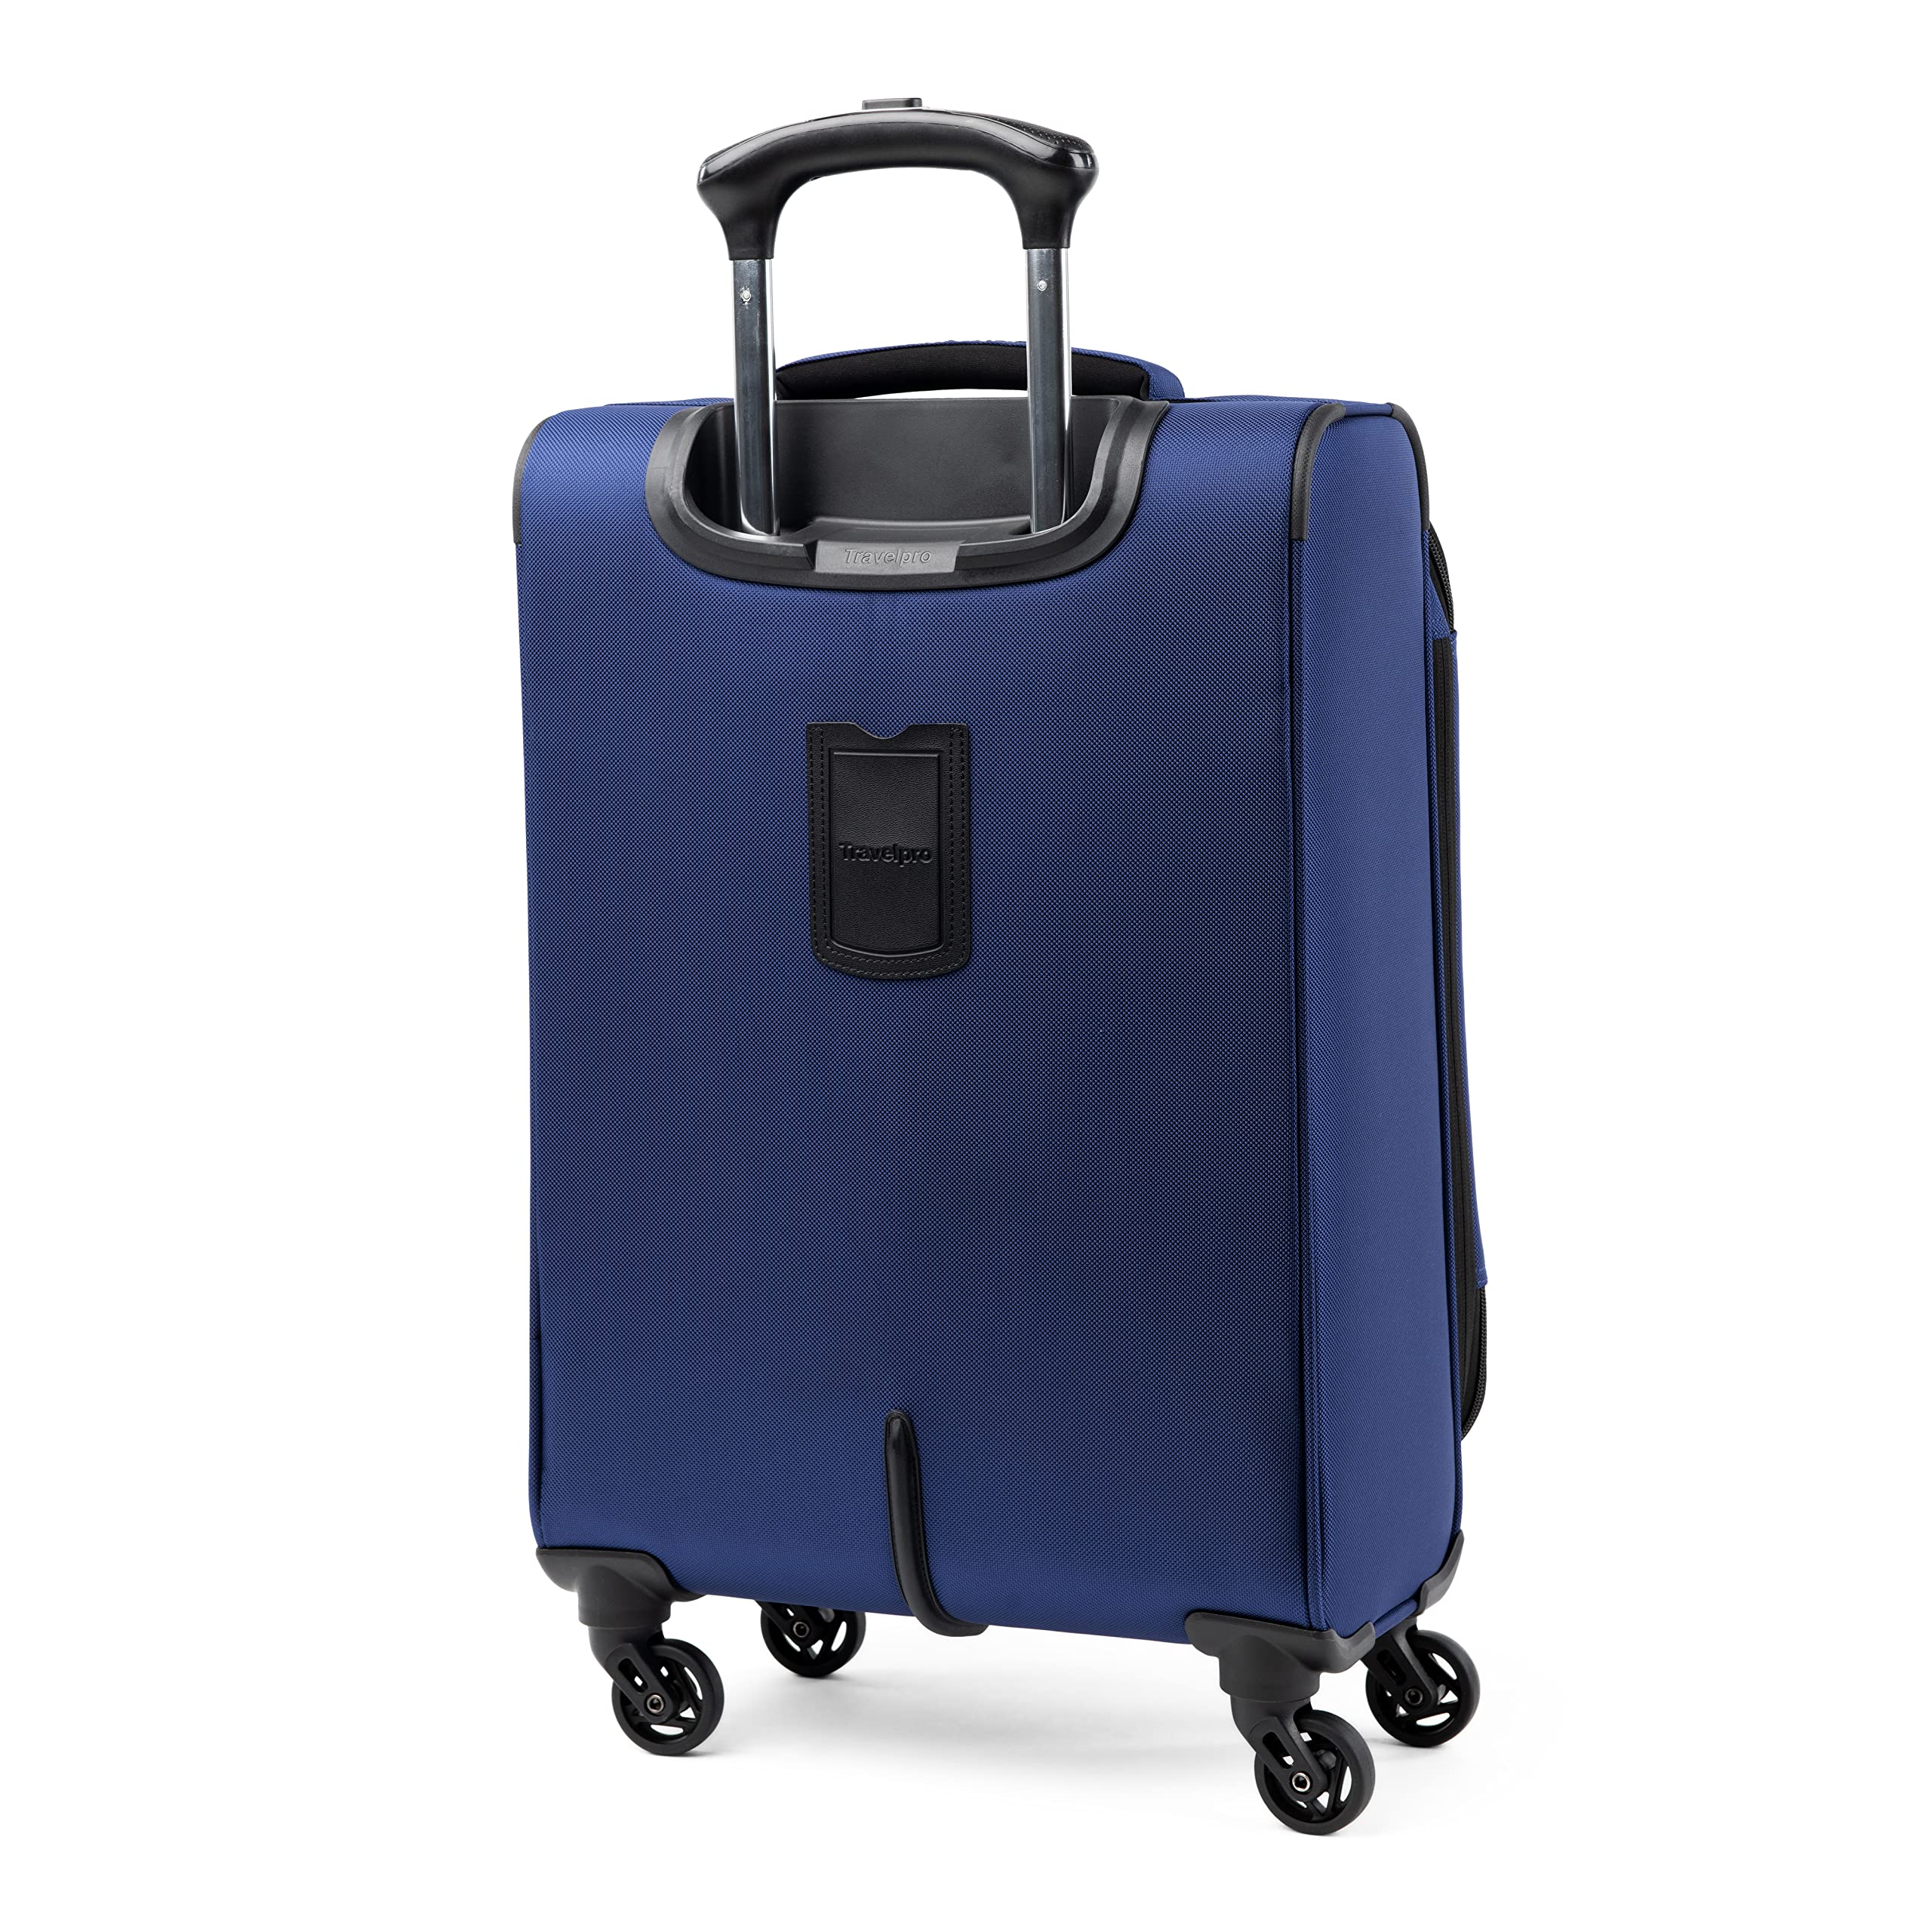 Travelpro Runway 2 Piece Luggage Set, Carry-on & Convertible Medium to Large Check-in Expandable Luggage, 4 Spinner Wheels, Softside Suitcase, Men and Women, Blue